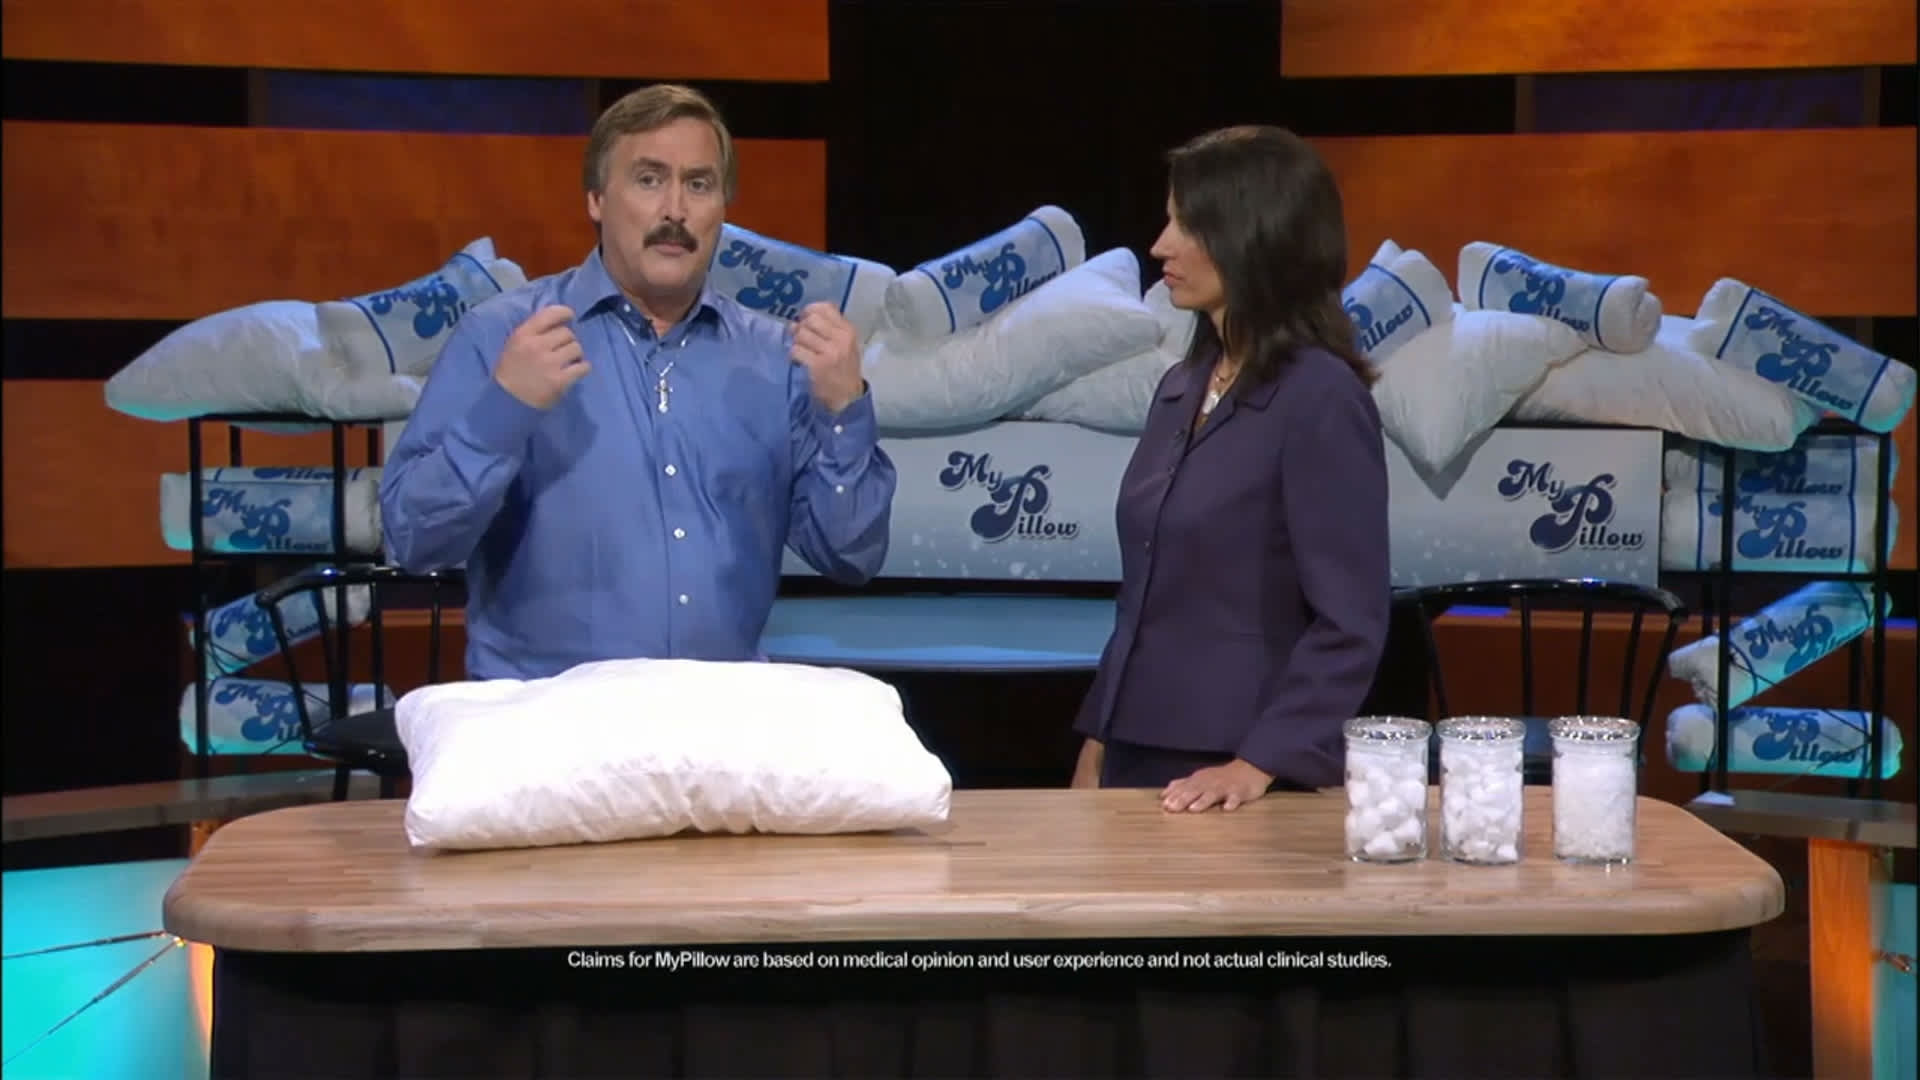 MyPillow founder went from crack addict 